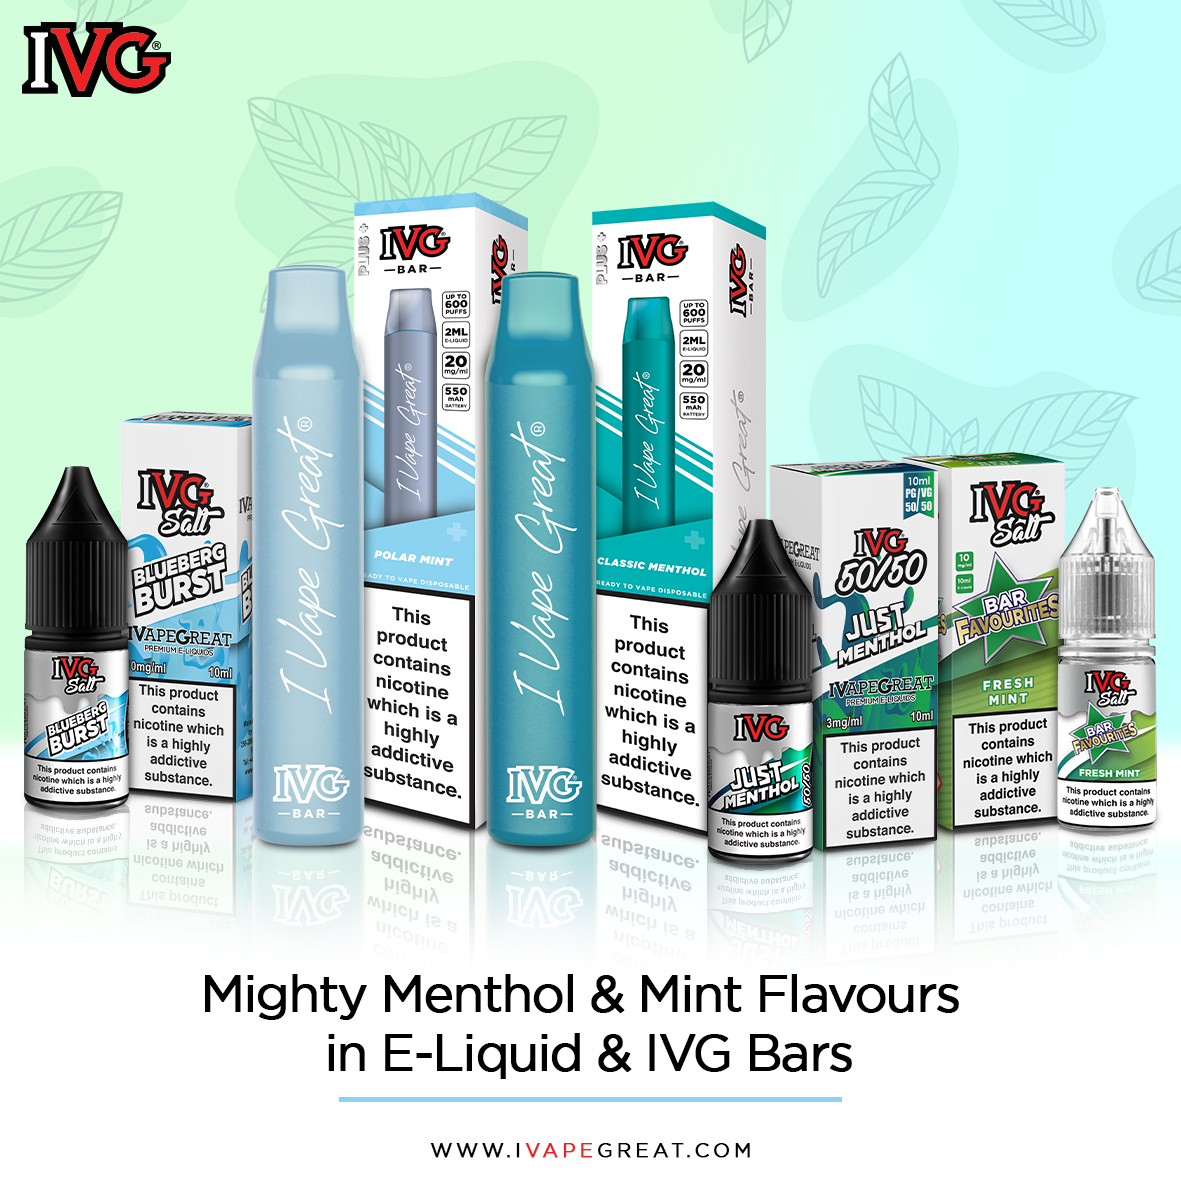 Our range of Bars and E-liquids feature a variety of menthol and mint options. Giving you a fresh kick or an icy, fruit twist. 

Get yours online today!
#ivapegreat #ivg #ivgbar #no2minors #ivgeliquids